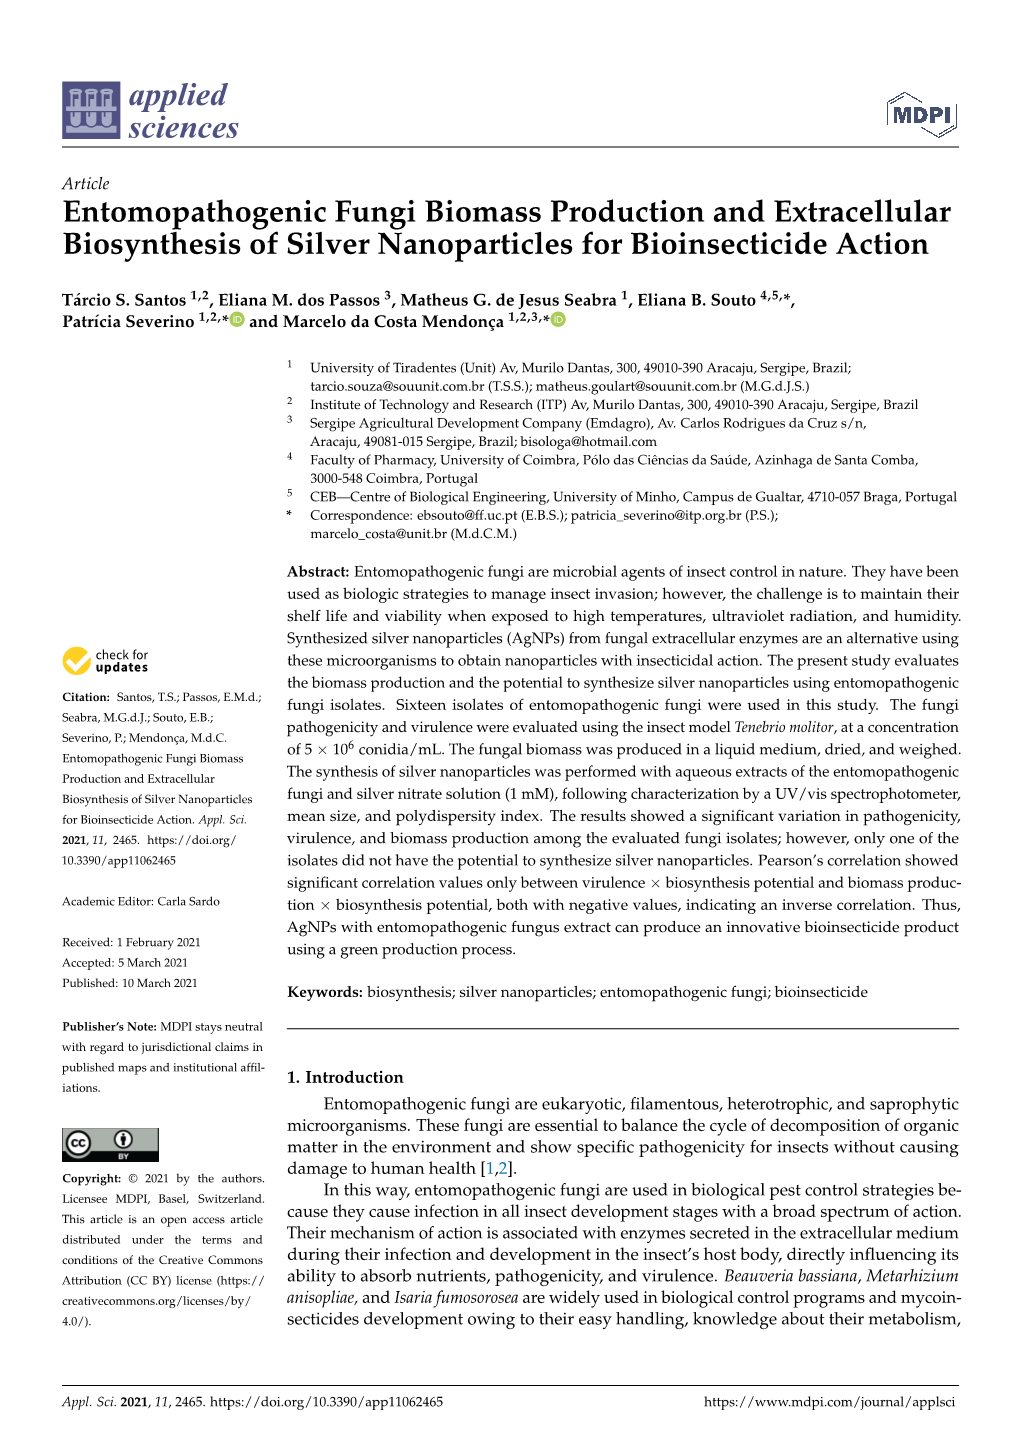 Entomopathogenic Fungi Biomass Production and Extracellular Biosynthesis of Silver Nanoparticles for Bioinsecticide Action